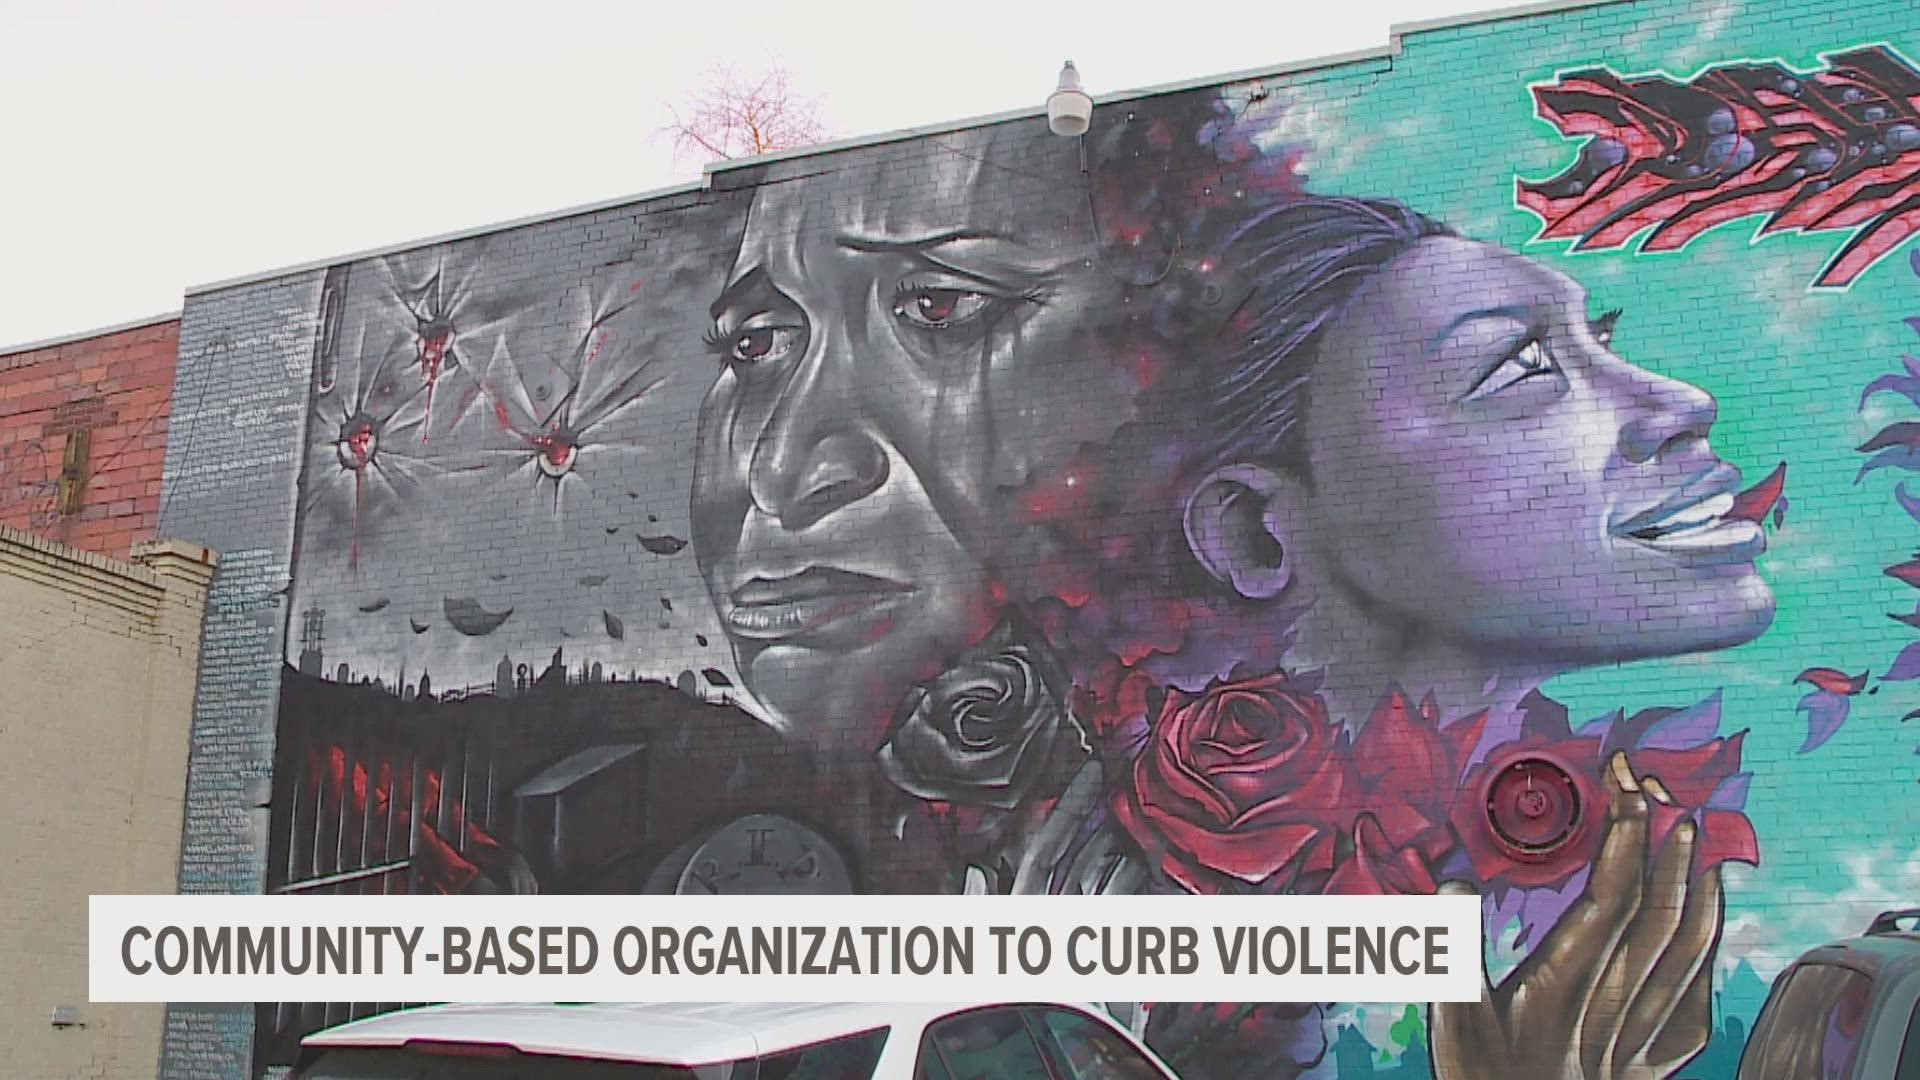 Monday night, the Des Moines City Council voted unanimously to approve the "Cure Violence" initiative, which is a "behavioral health approach" to reducing violence.